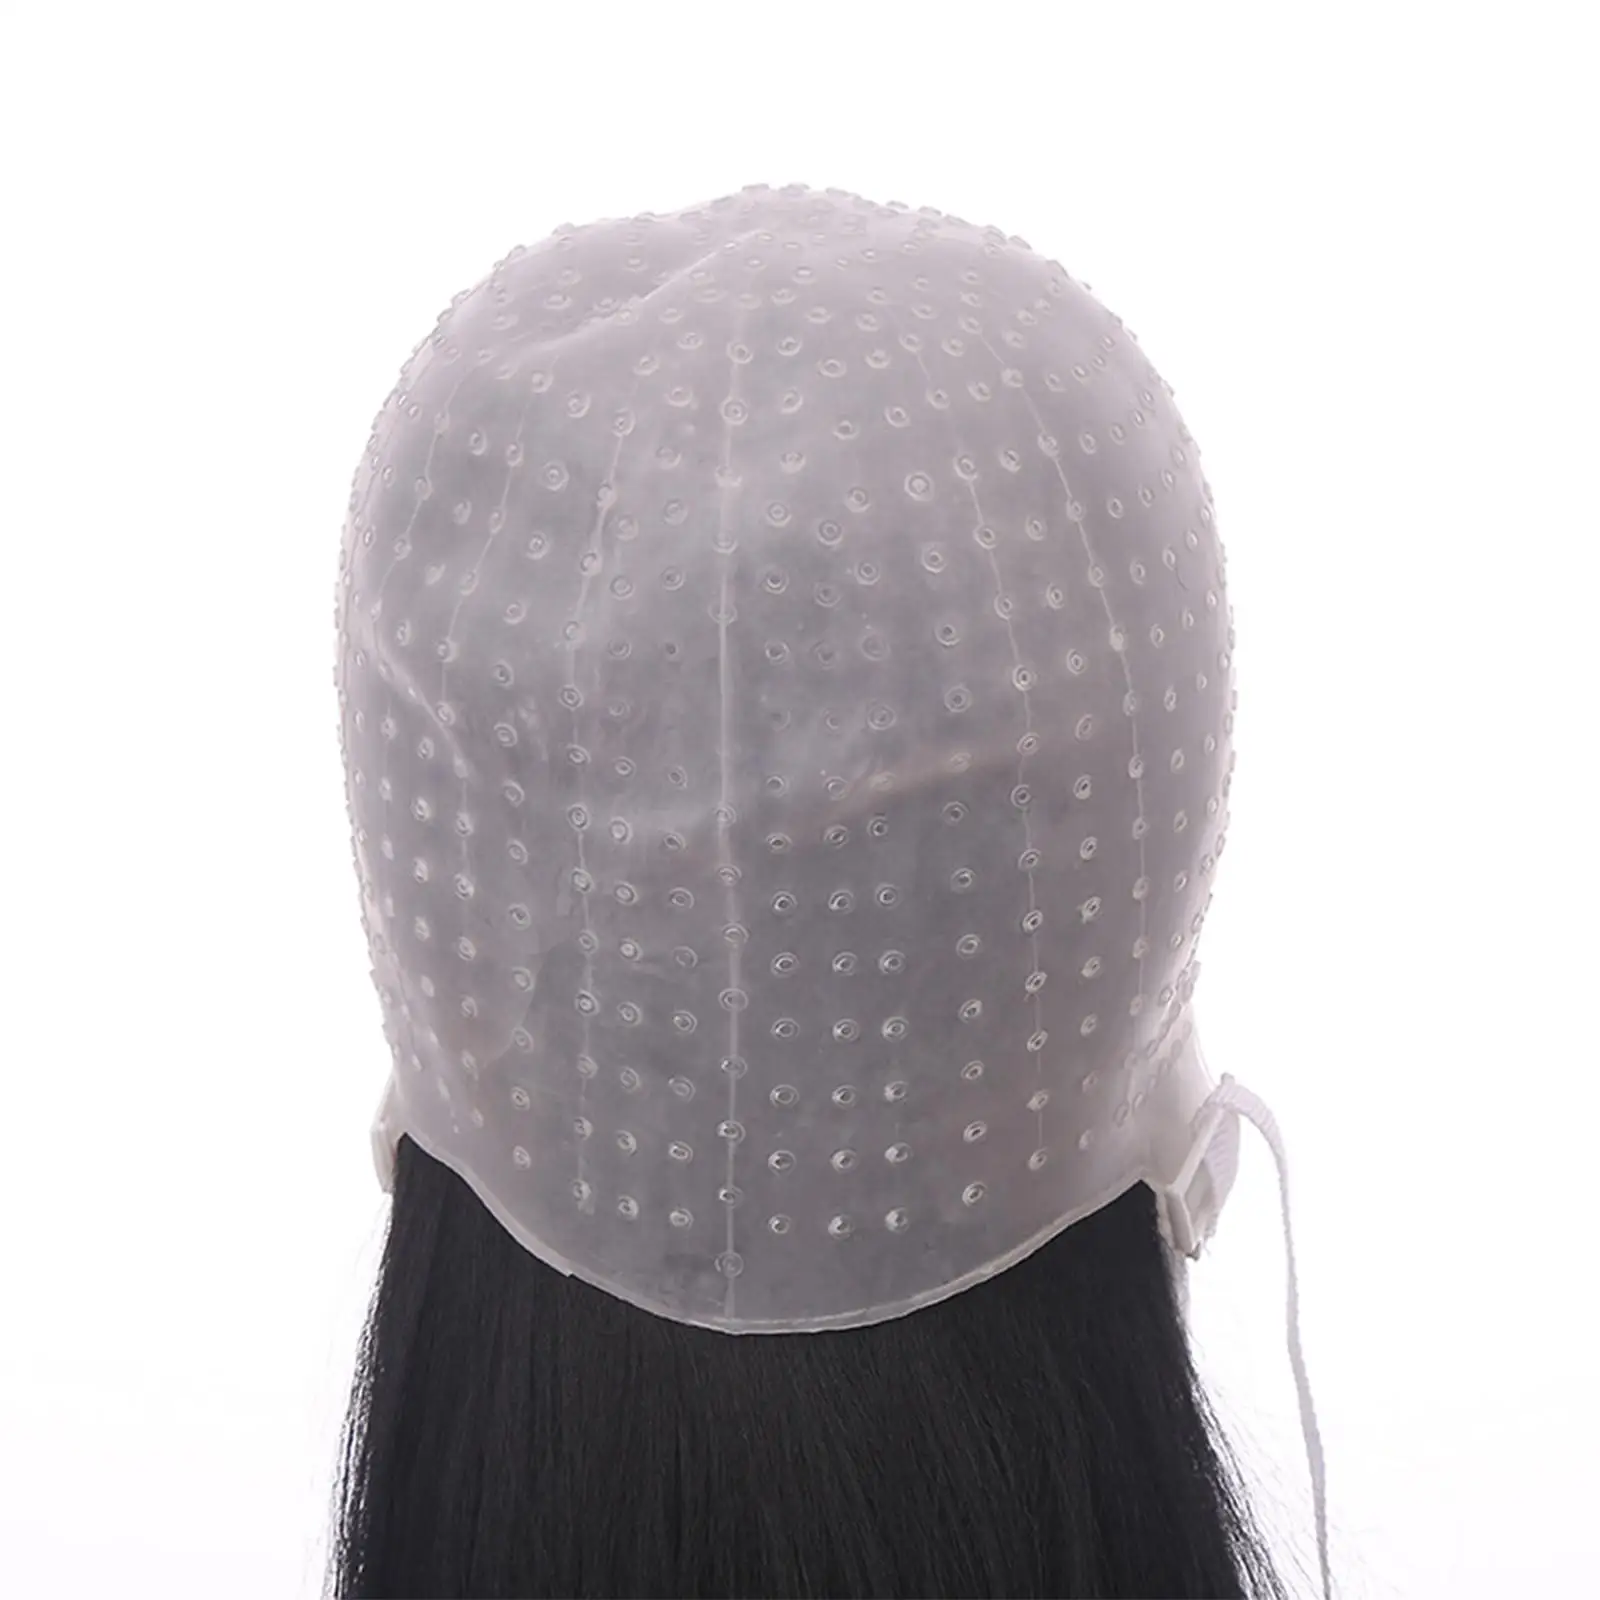 Silicone Hair Highlighting Hat, W/ Pre Punched Comfortable  Dye Hat for Barber Hair Styling Hair Salon  